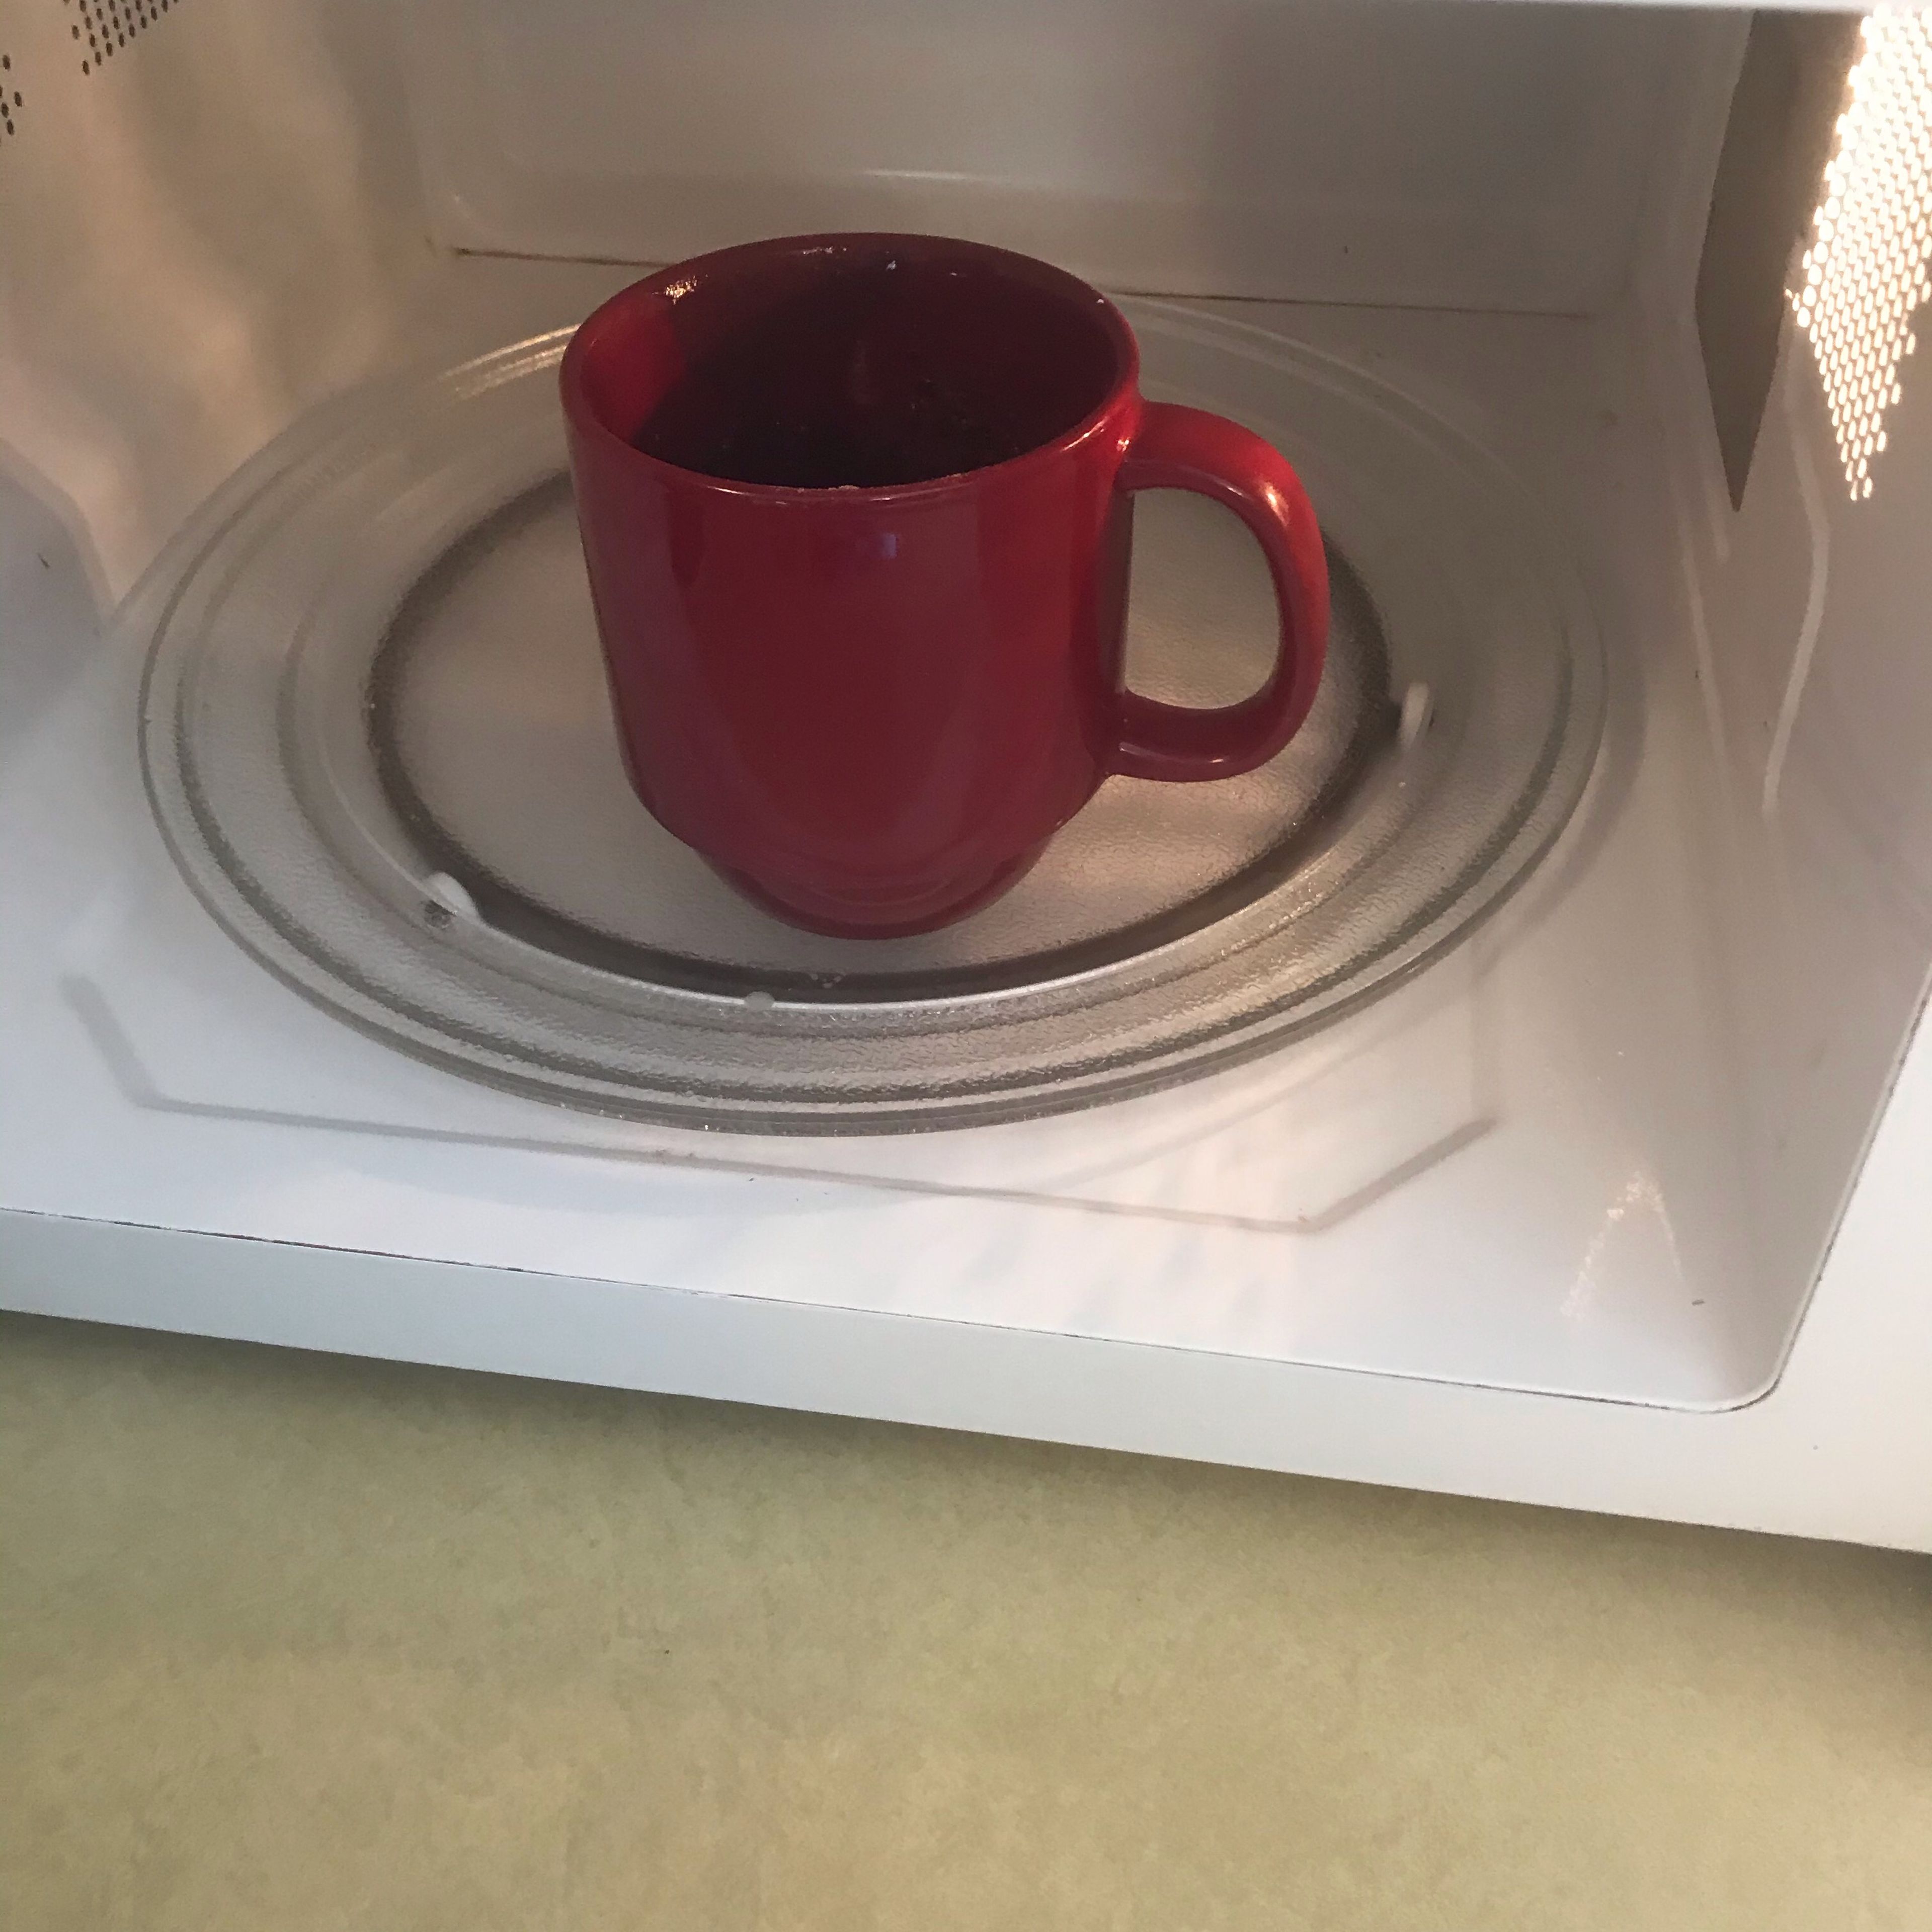 Put your mug brownie in the microwave for 1 min. After let cool for about 30 sec.